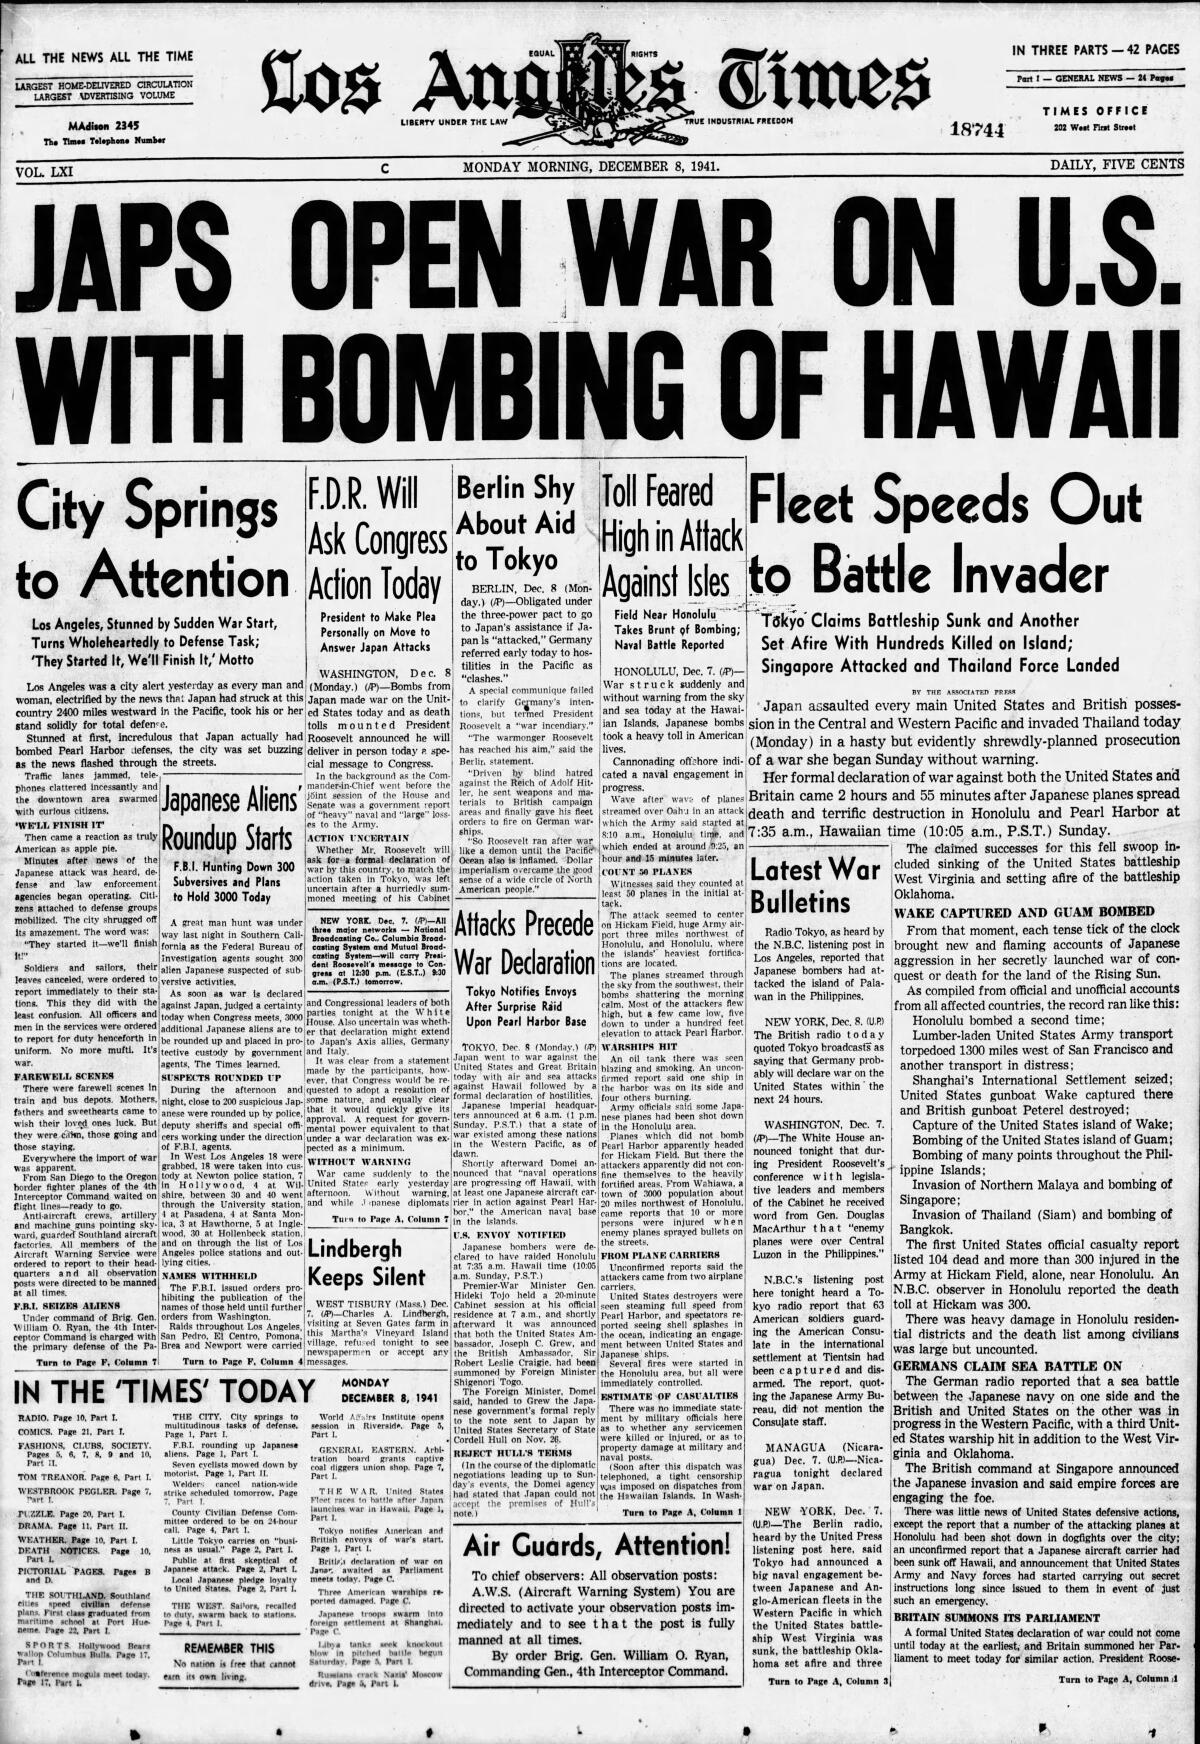 A Los Angeles Times newspaper clipping about Japan's attack on Pearl Harbor in 1941.